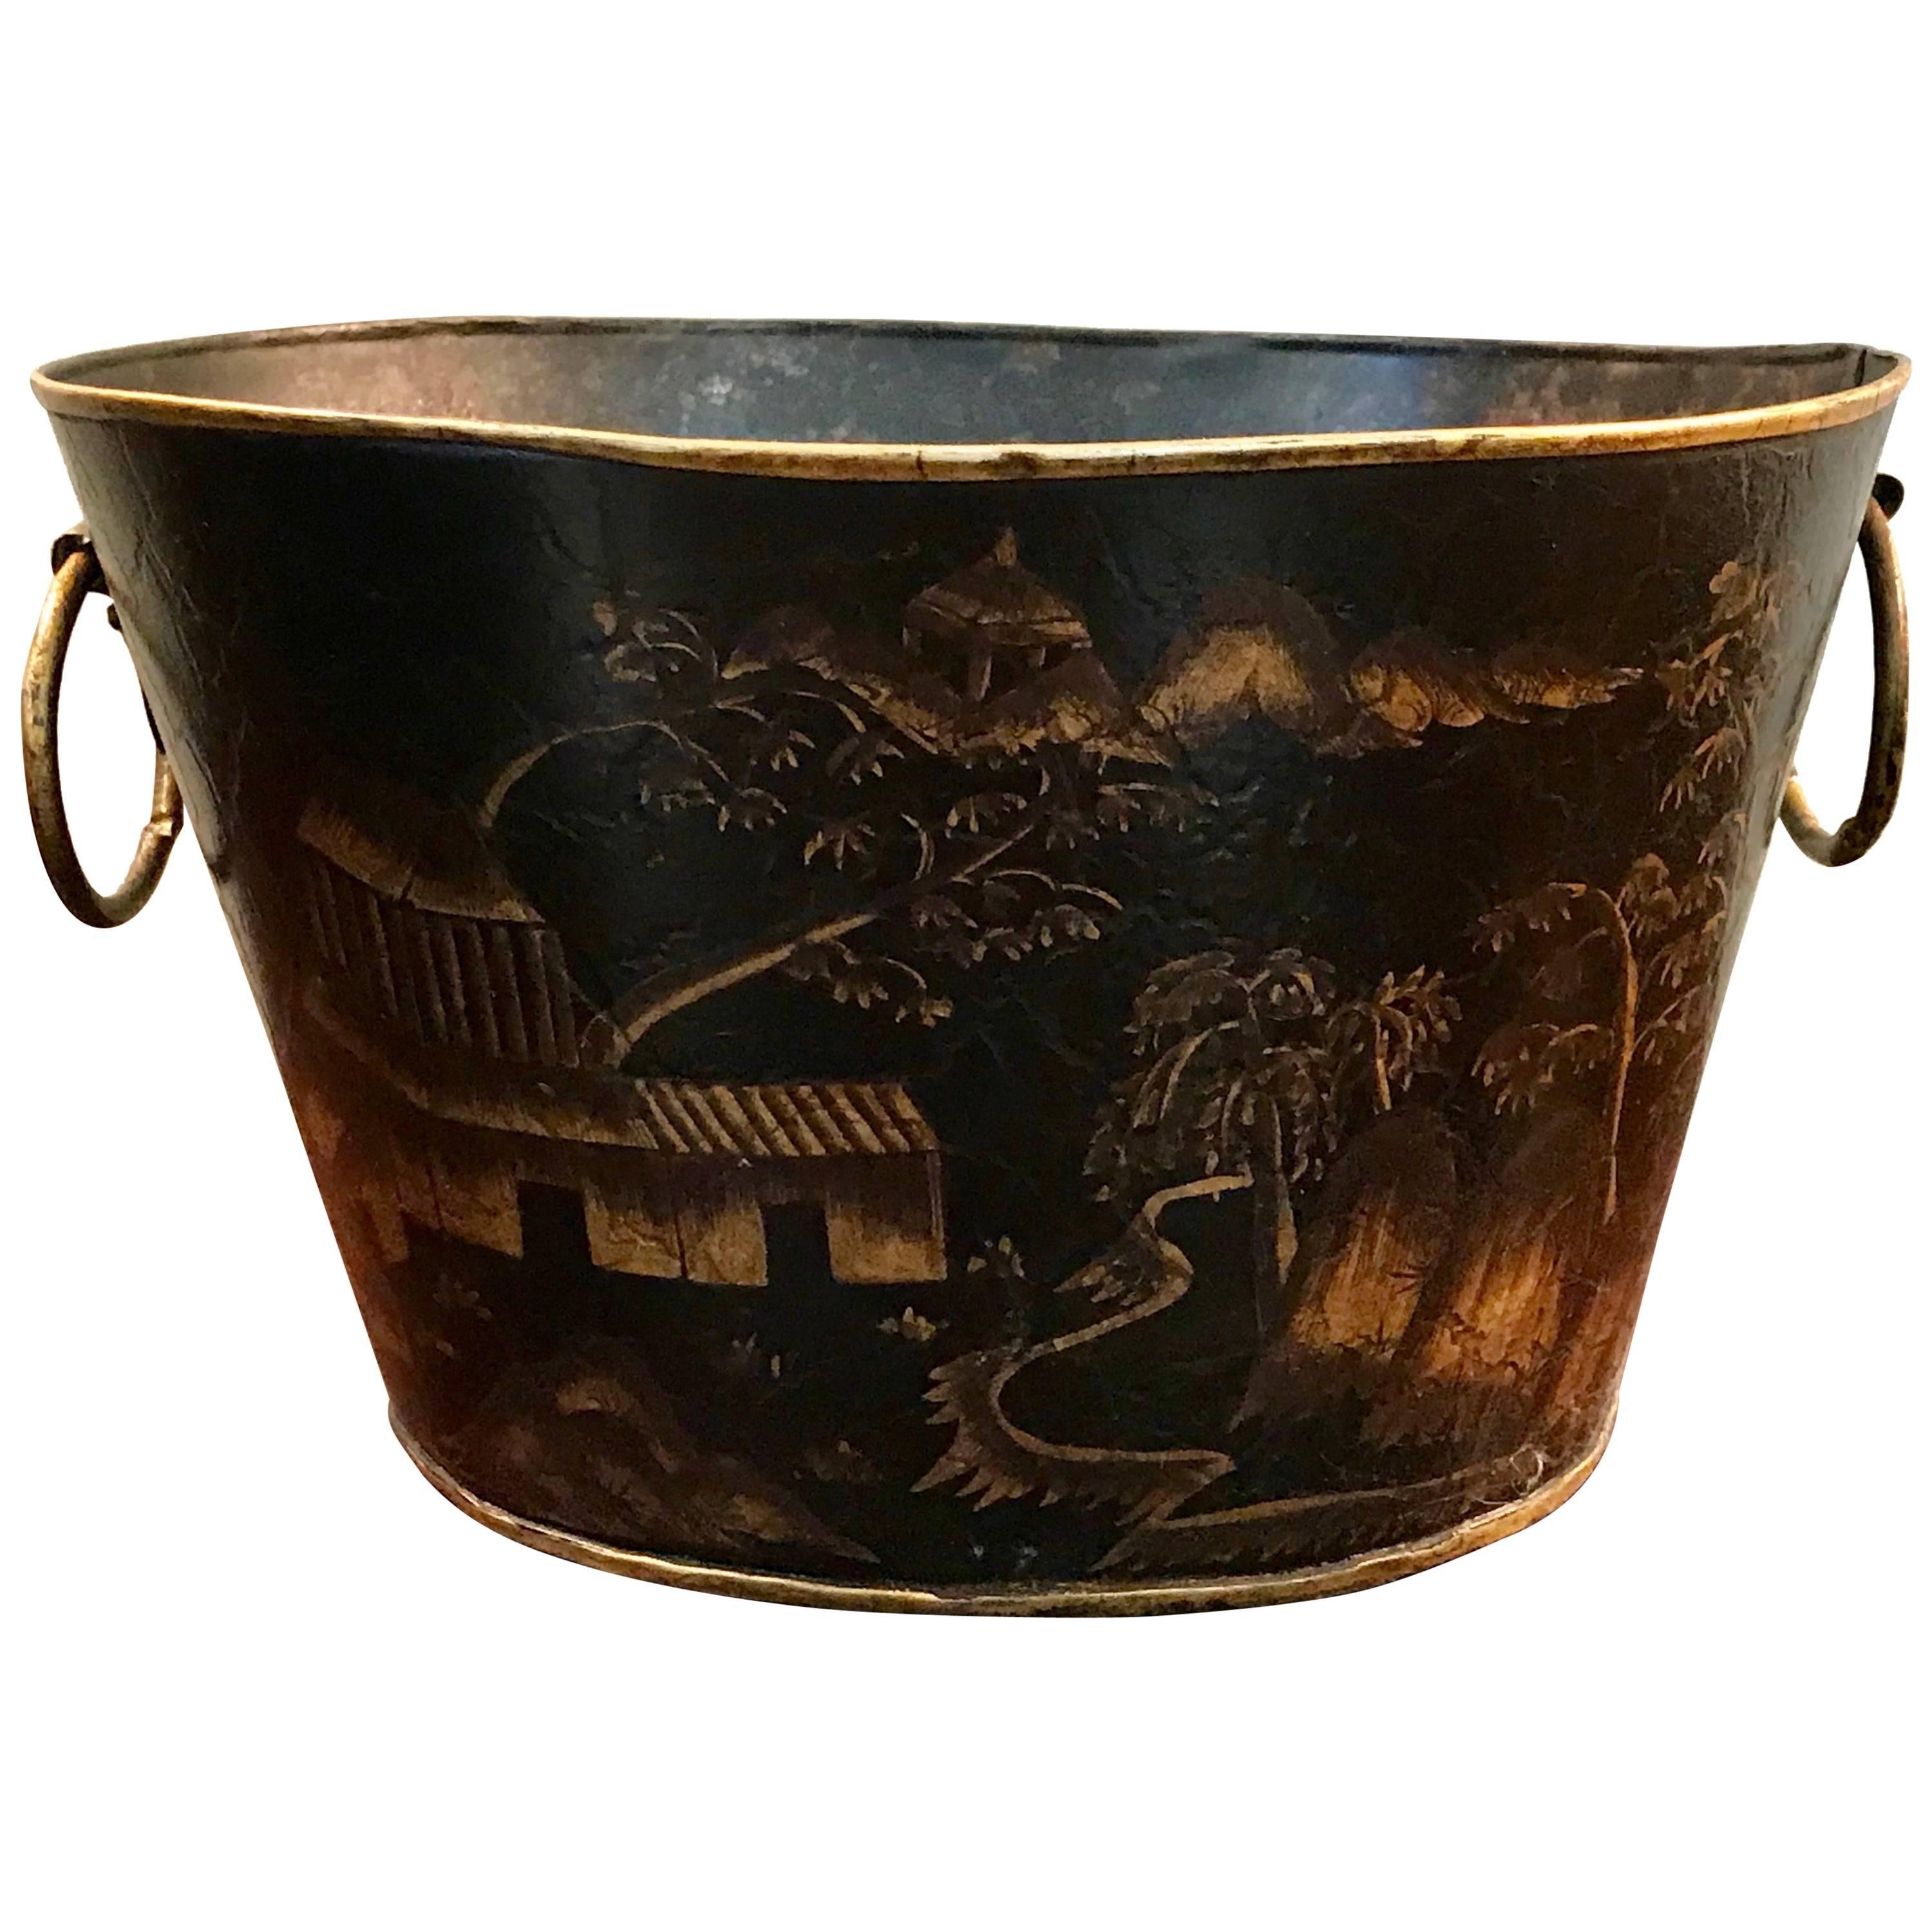 1950s Black and Gold Tole Cachepot with a Chinoiserie and Pagoda Motif